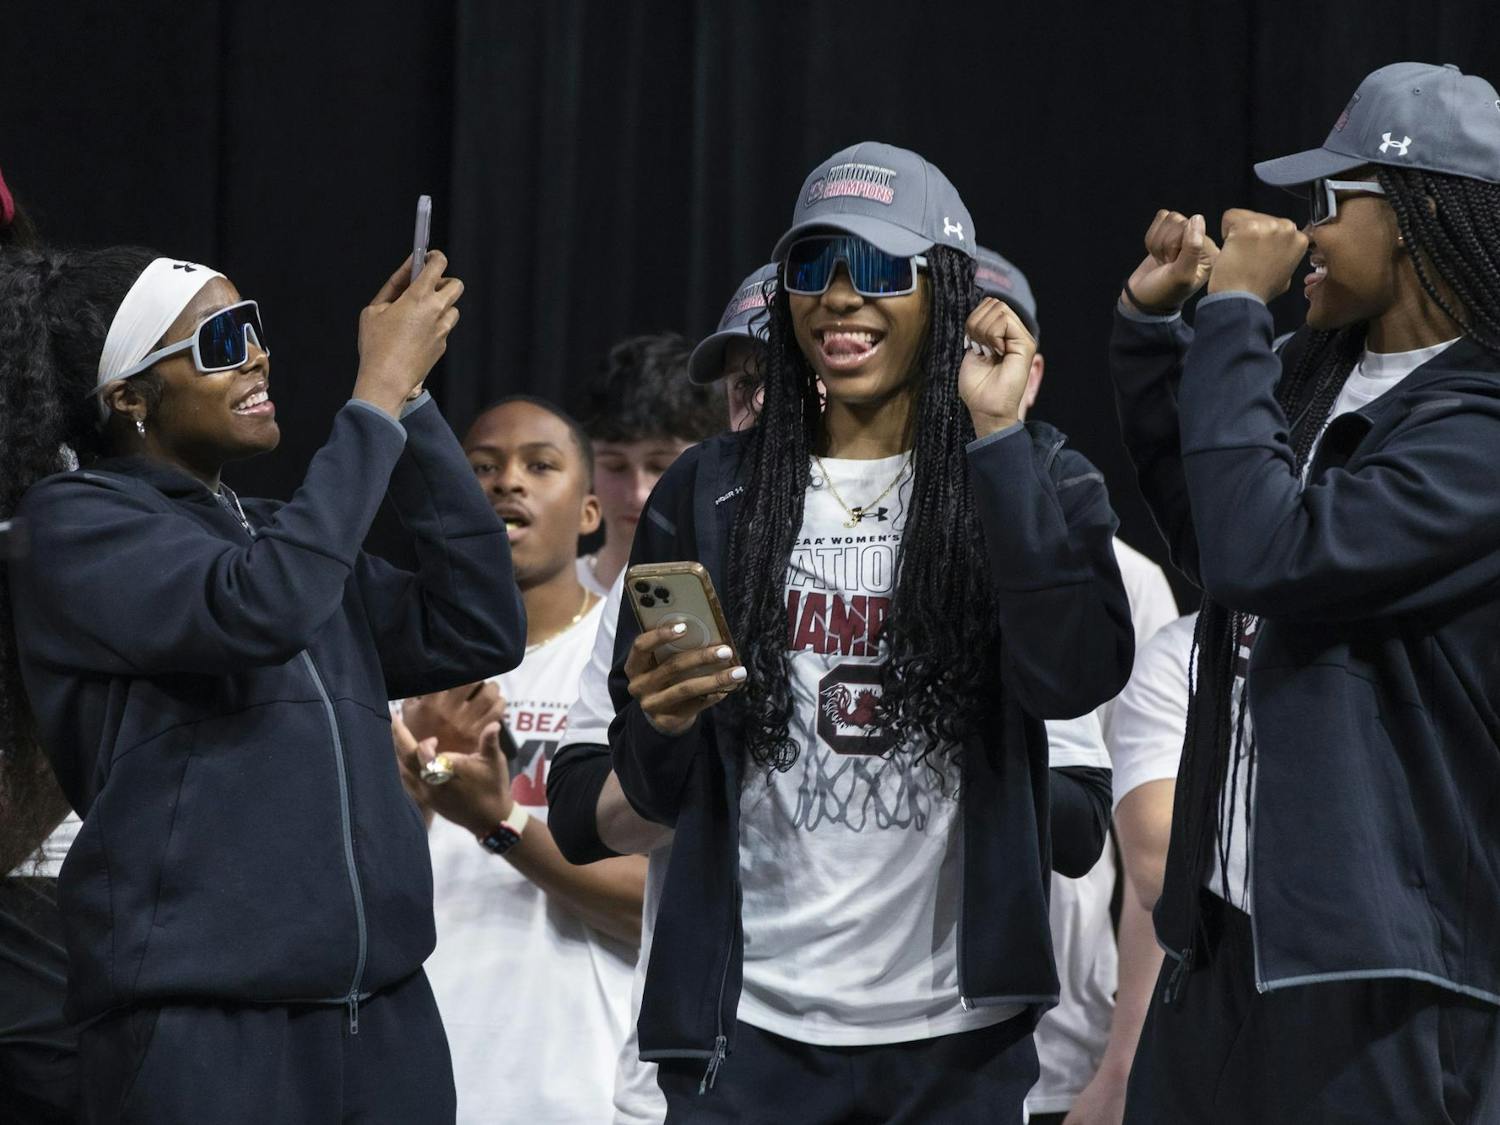 Sophomore guard Raven Johnson takes a photo of junior guard Bree Hall on stage at Colonial Life Arena on April 8, 2024. The Gamecock women's basketball team was welcomed home by fans in a celebration with remarks from athletic director Ray Tanner and head coach Dawn Staley.